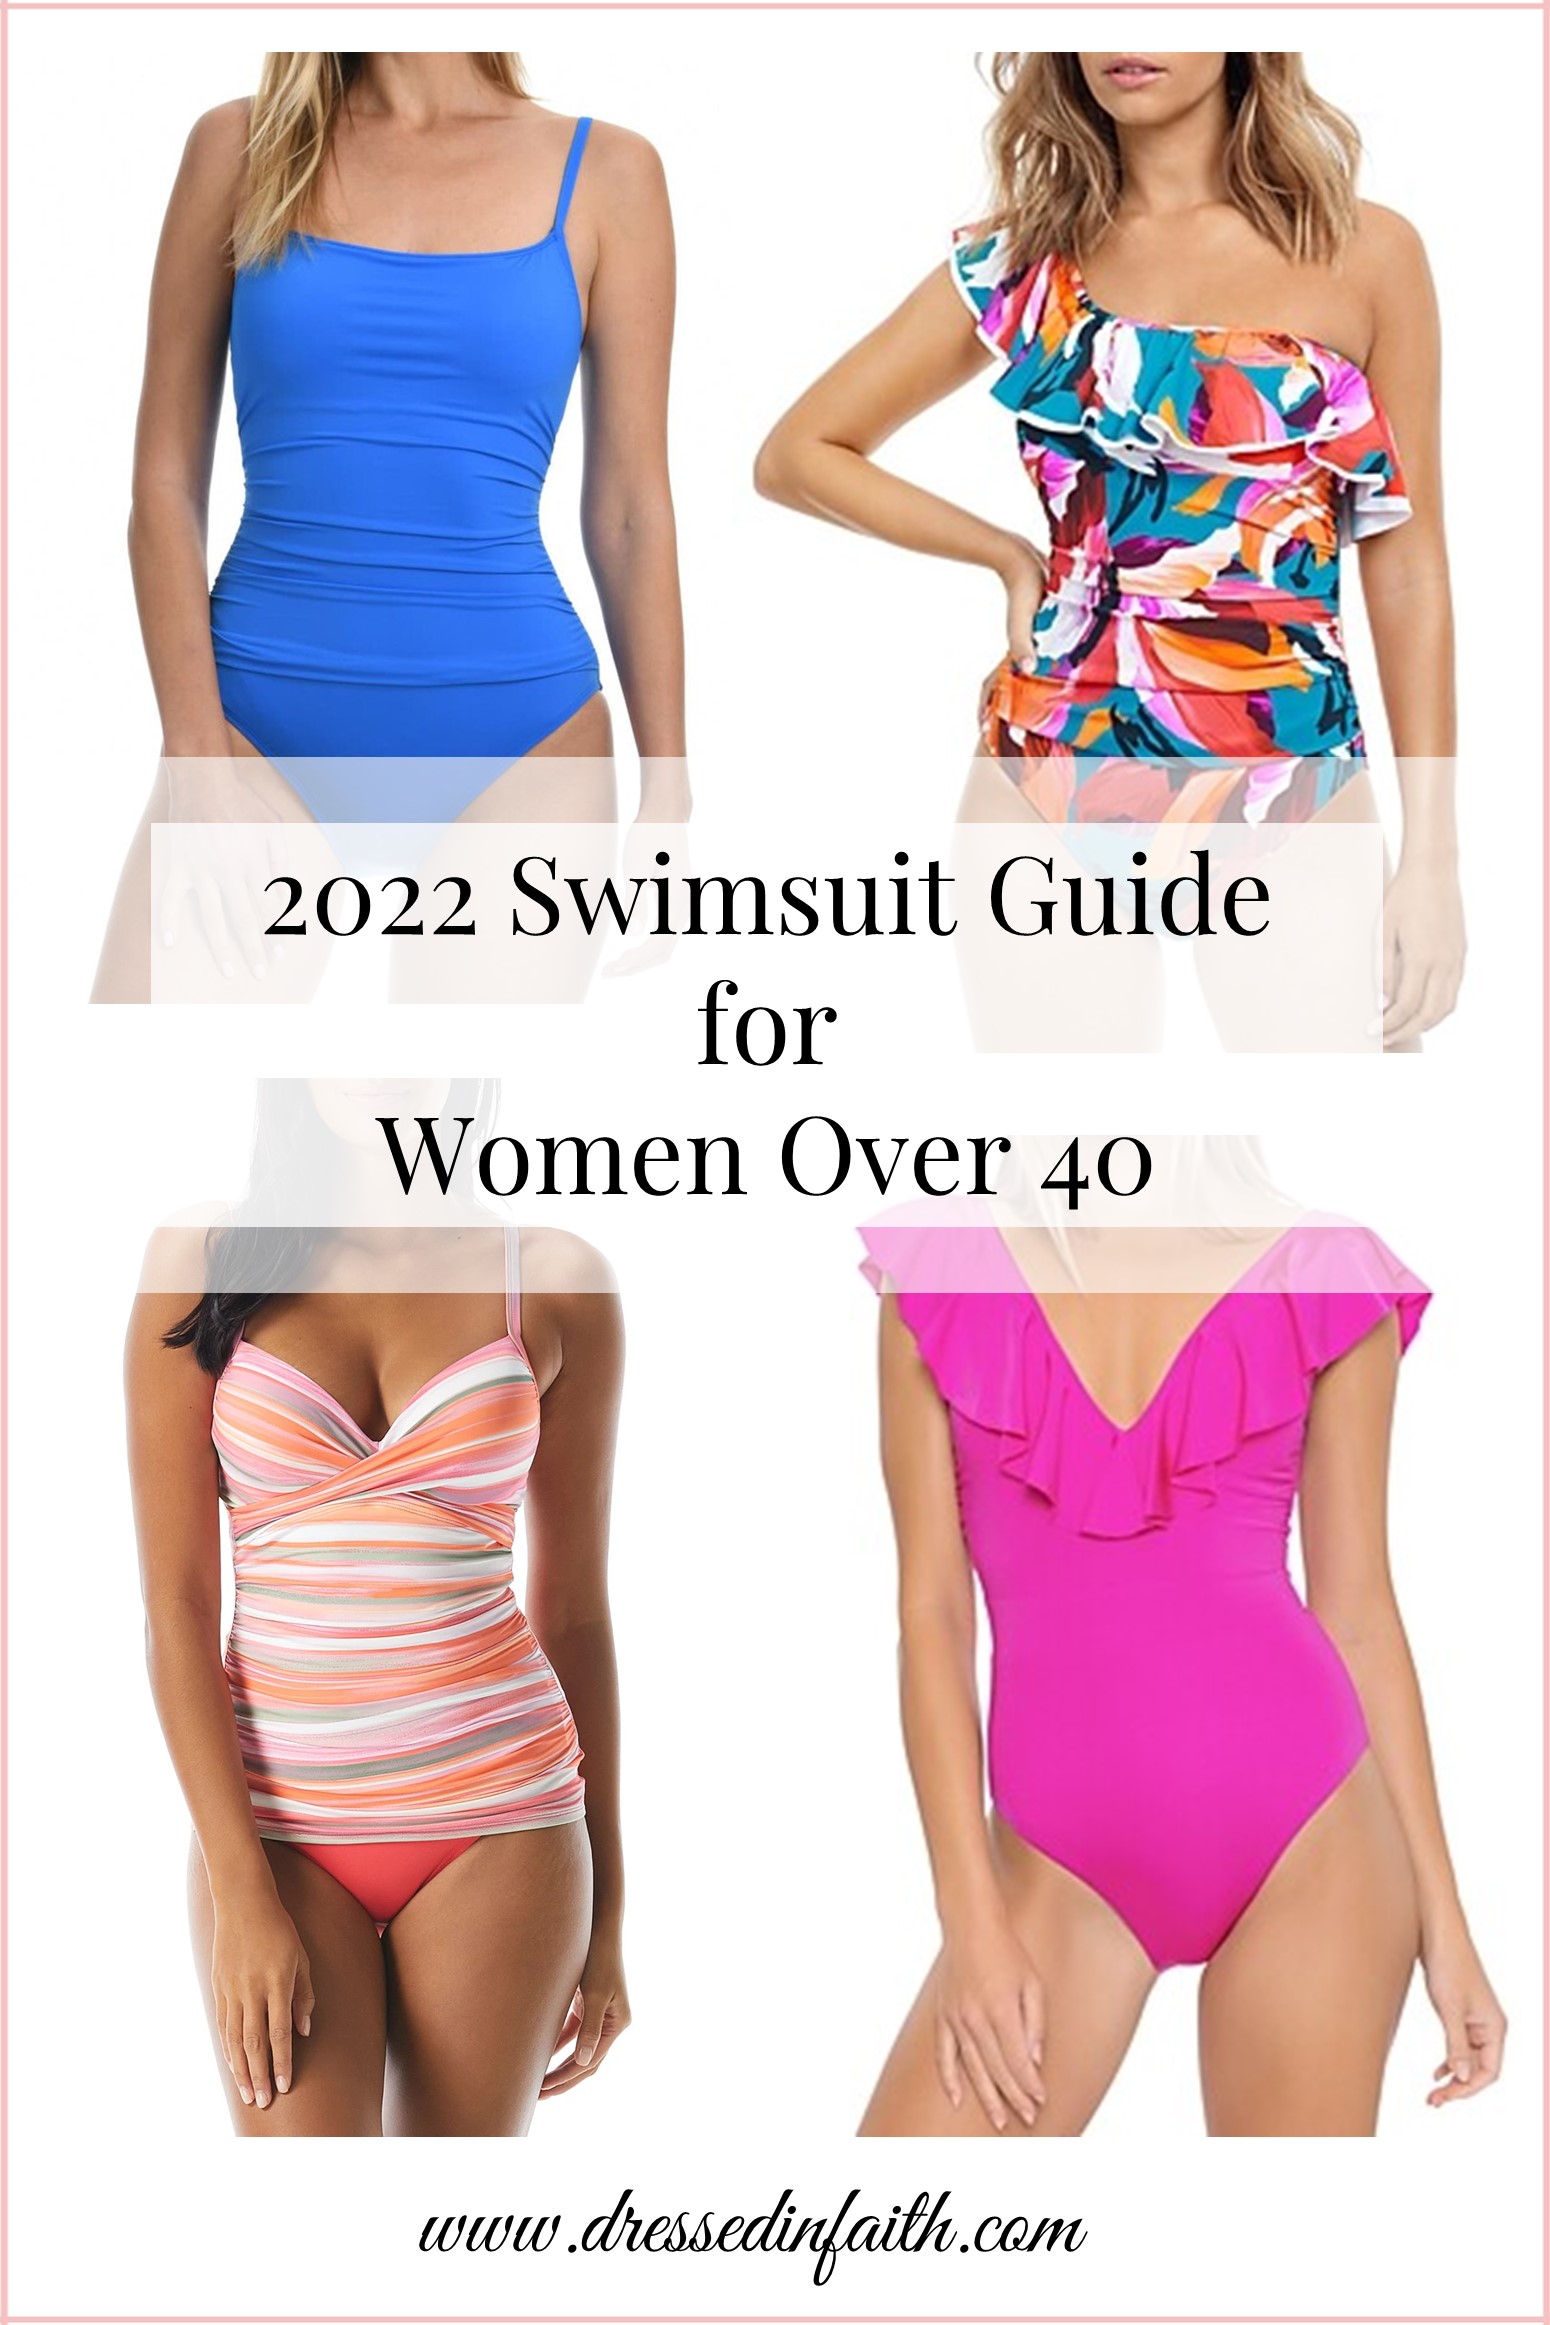 The Most Flattering Swimsuits For Women Over 40 (2022 Guide)